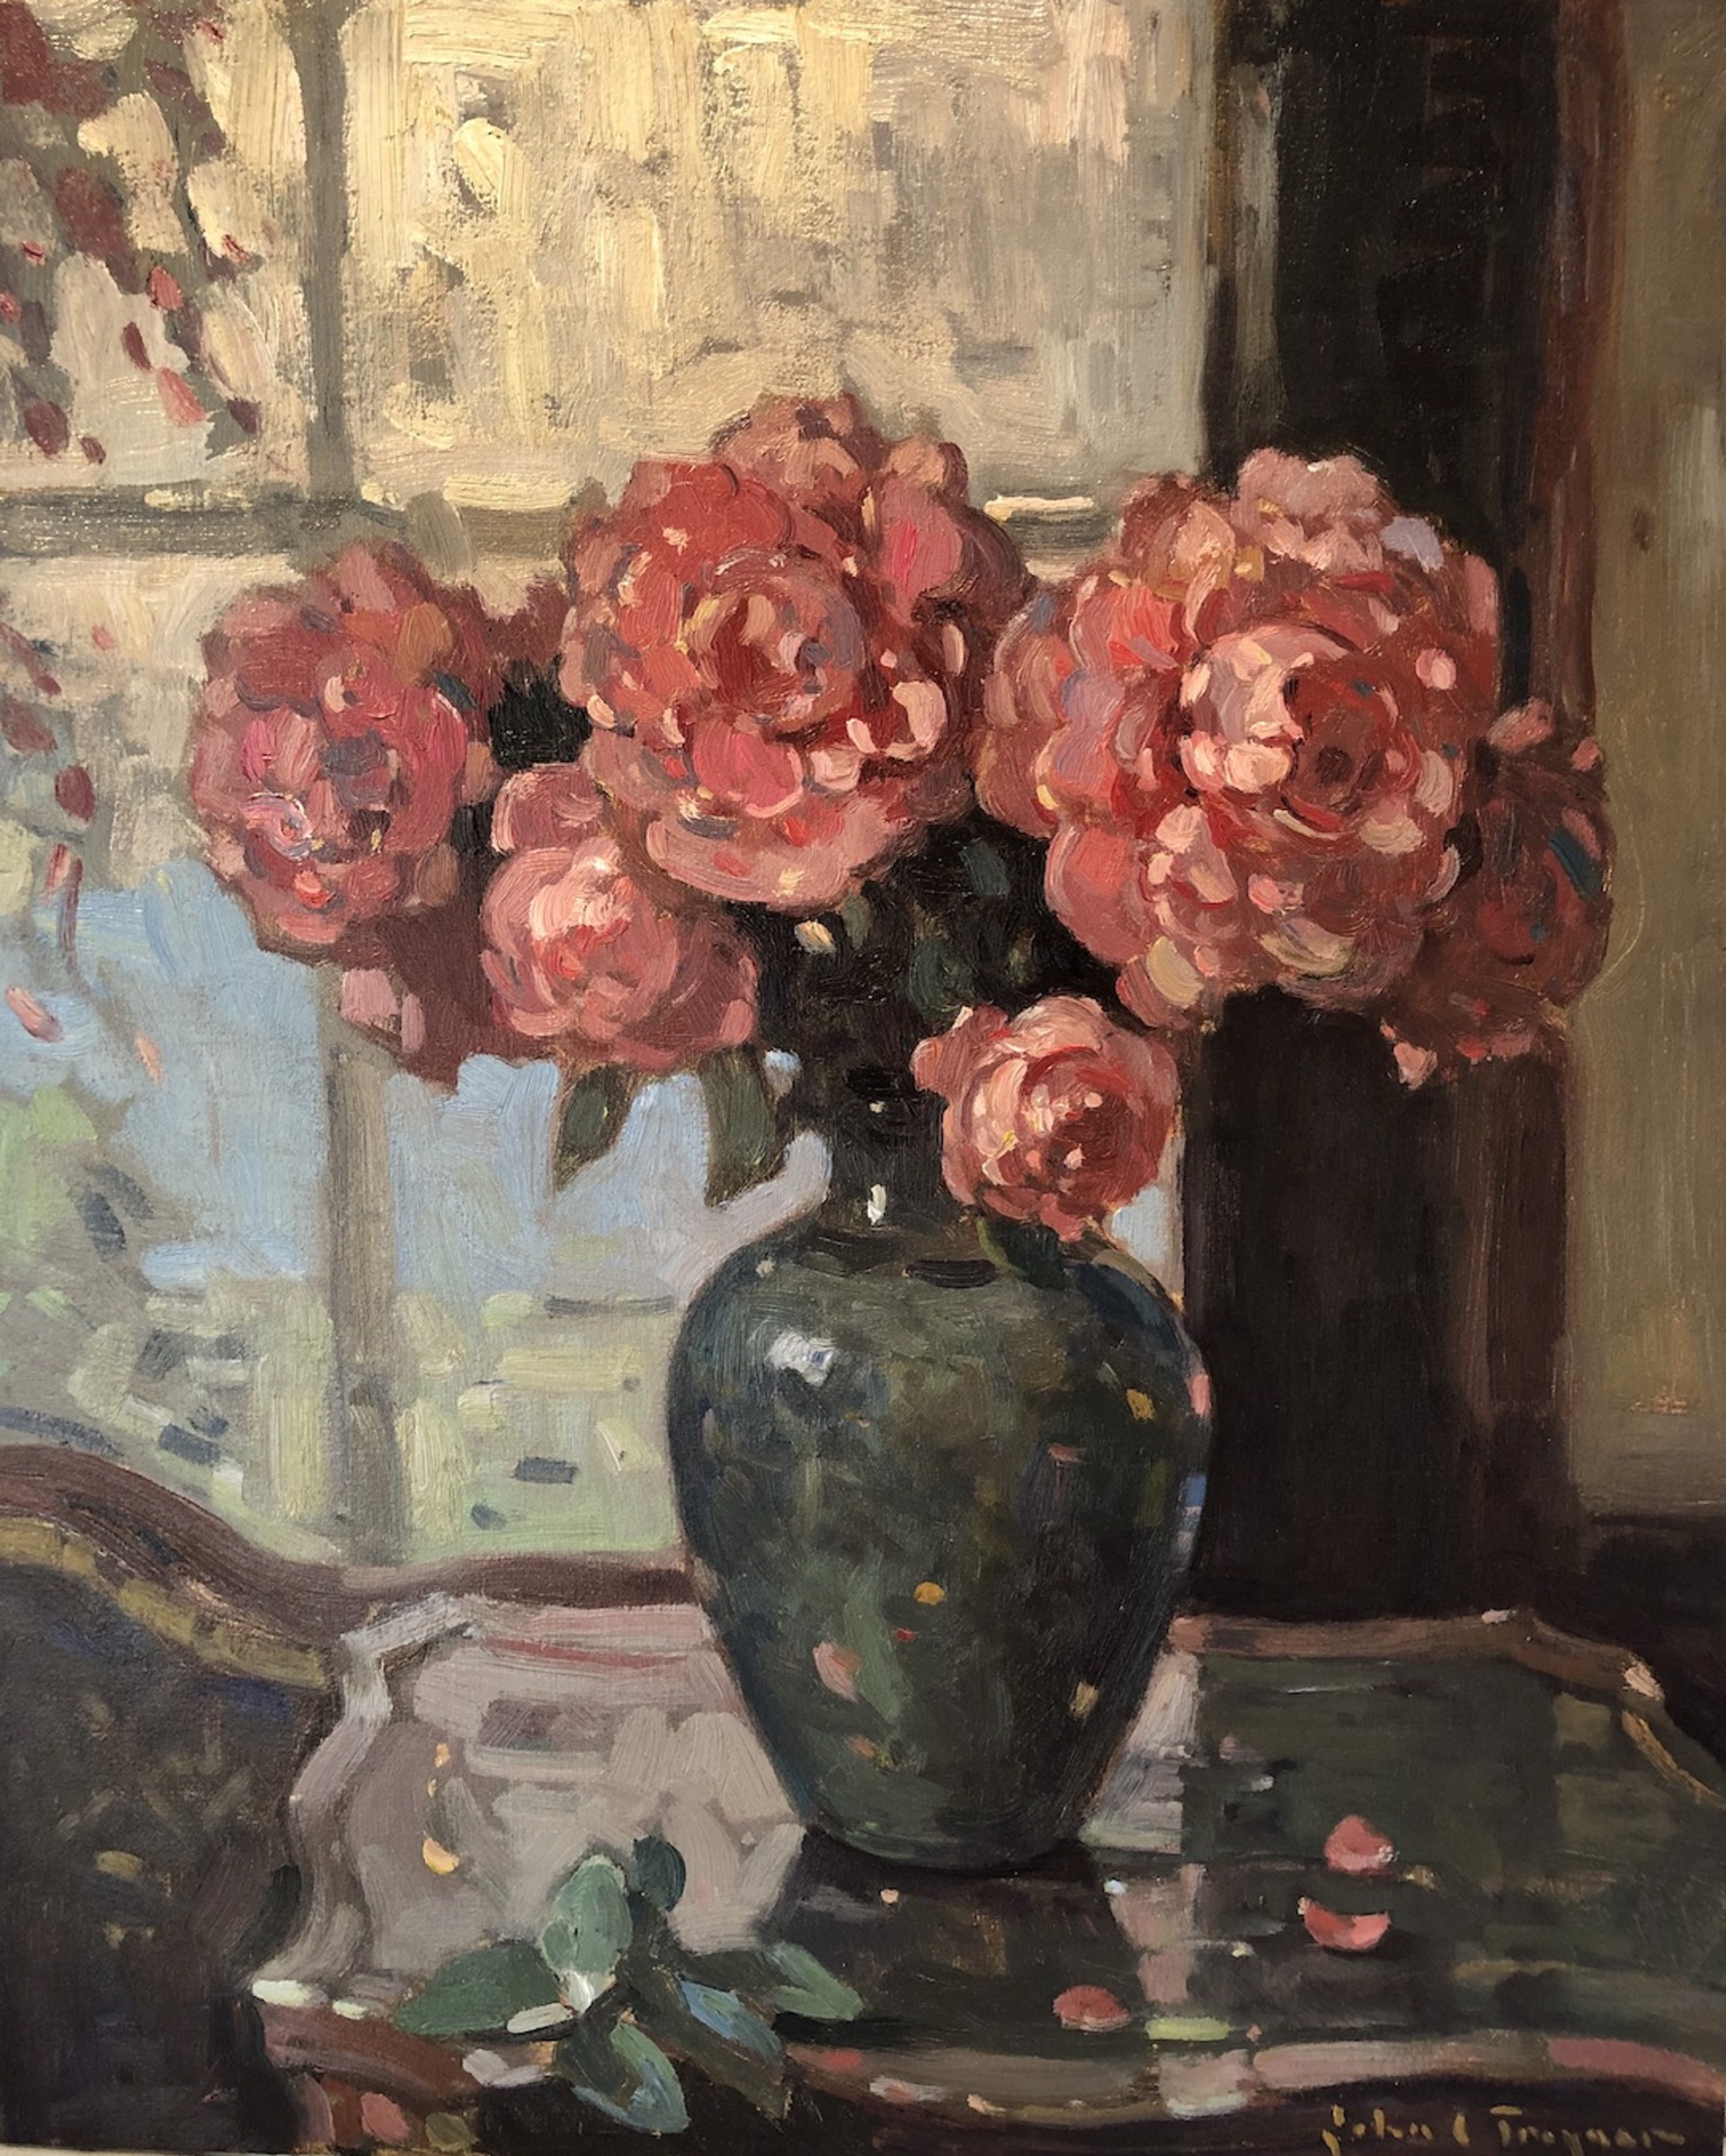 Flowers in the Parlor by John C. Traynor